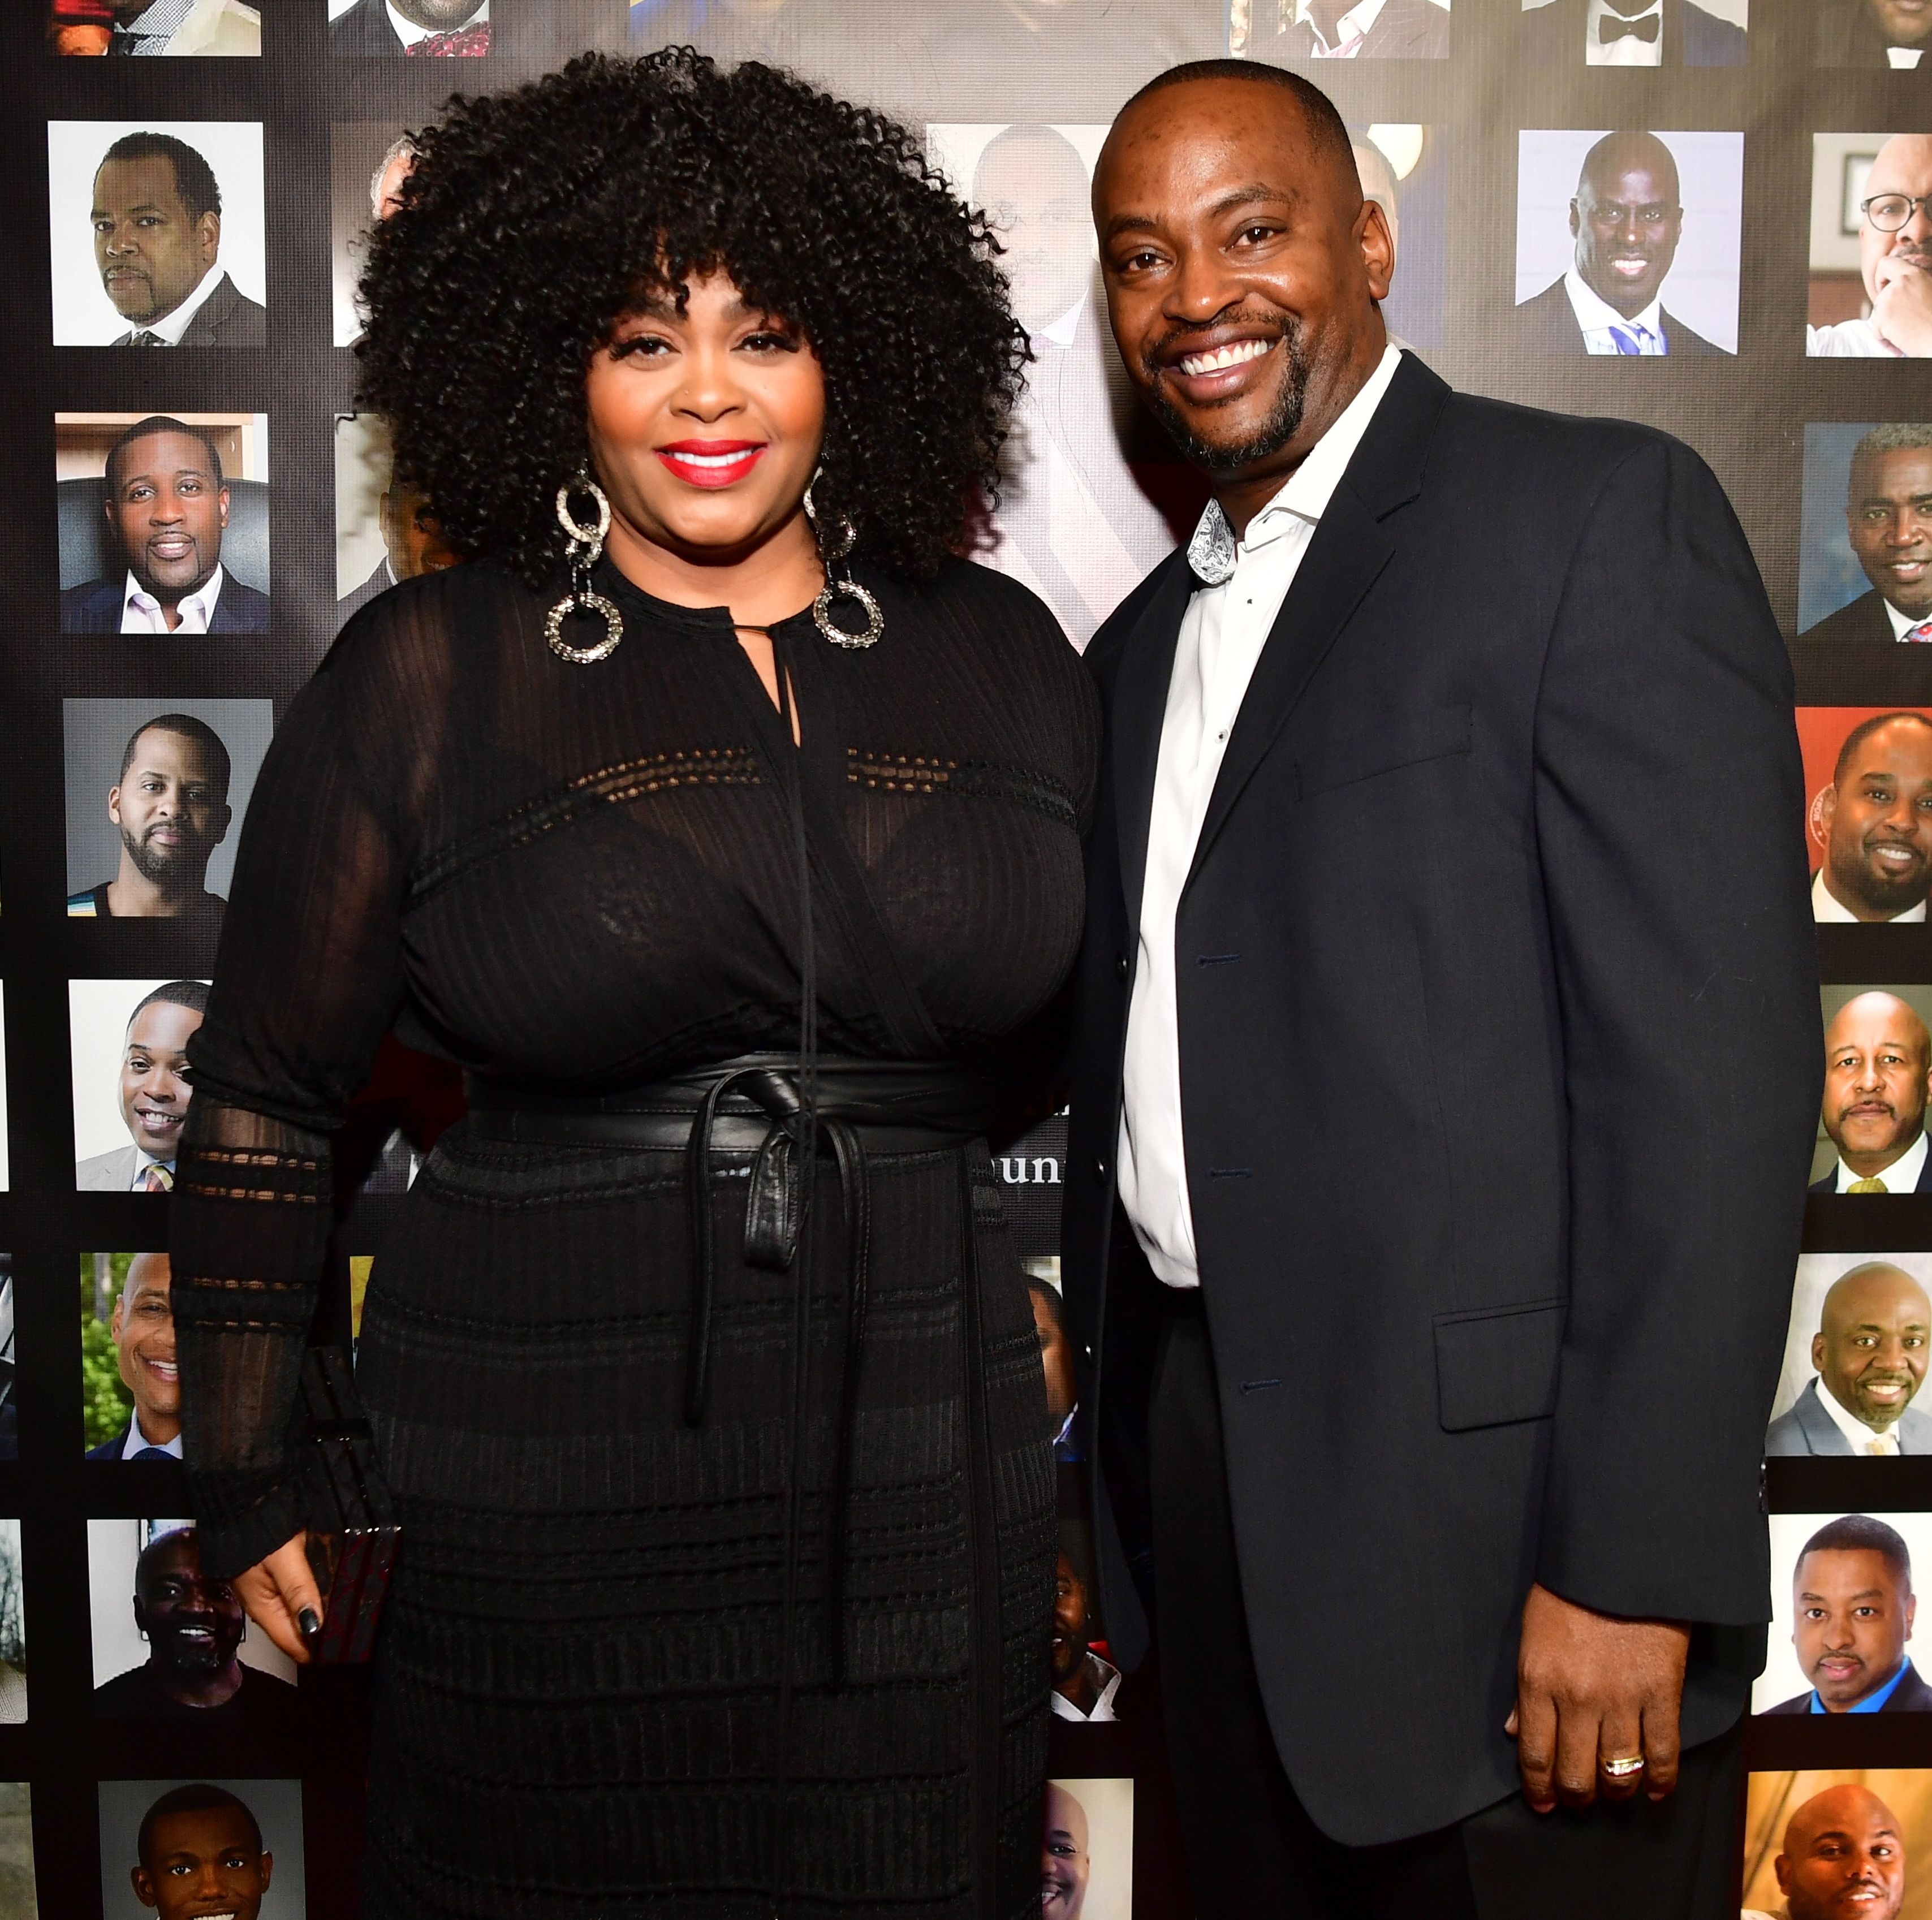 Jill Scott and Mike Dobson at the "The Made Man Awards 2017" in Atlanta, Georgia | Source: Getty Images